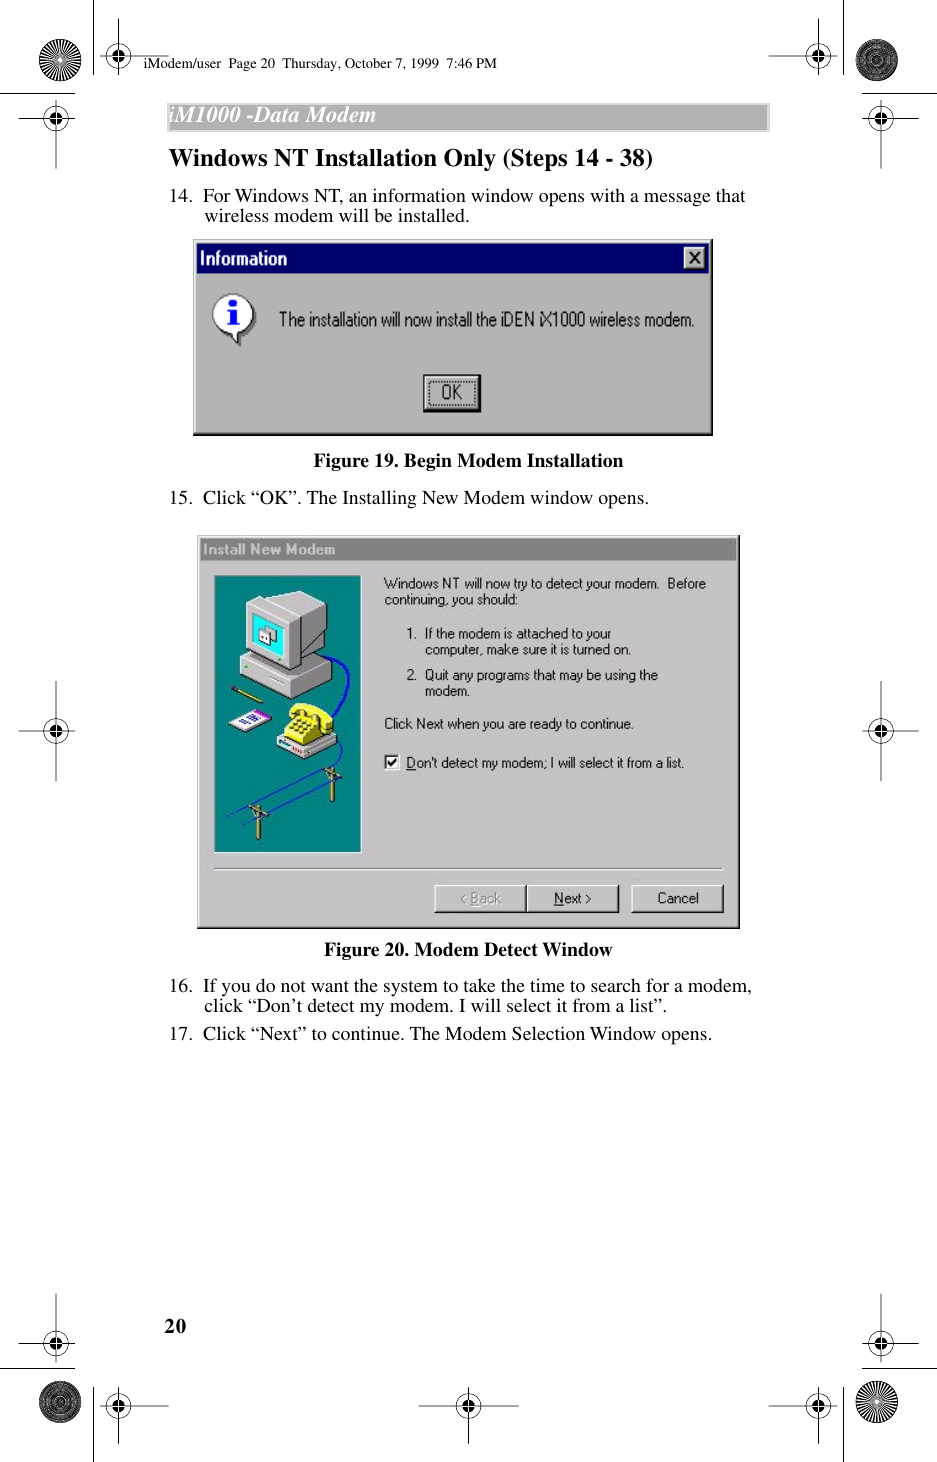 20iM1000 -Data Modem  Windows NT Installation Only (Steps 14 - 38)14.  For Windows NT, an information window opens with a message that wireless modem will be installed.Figure 19. Begin Modem Installation15.  Click “OK”. The Installing New Modem window opens. Figure 20. Modem Detect Window16.  If you do not want the system to take the time to search for a modem, click “Don’t detect my modem. I will select it from a list”.17.  Click “Next” to continue. The Modem Selection Window opens.iModem/user  Page 20  Thursday, October 7, 1999  7:46 PM